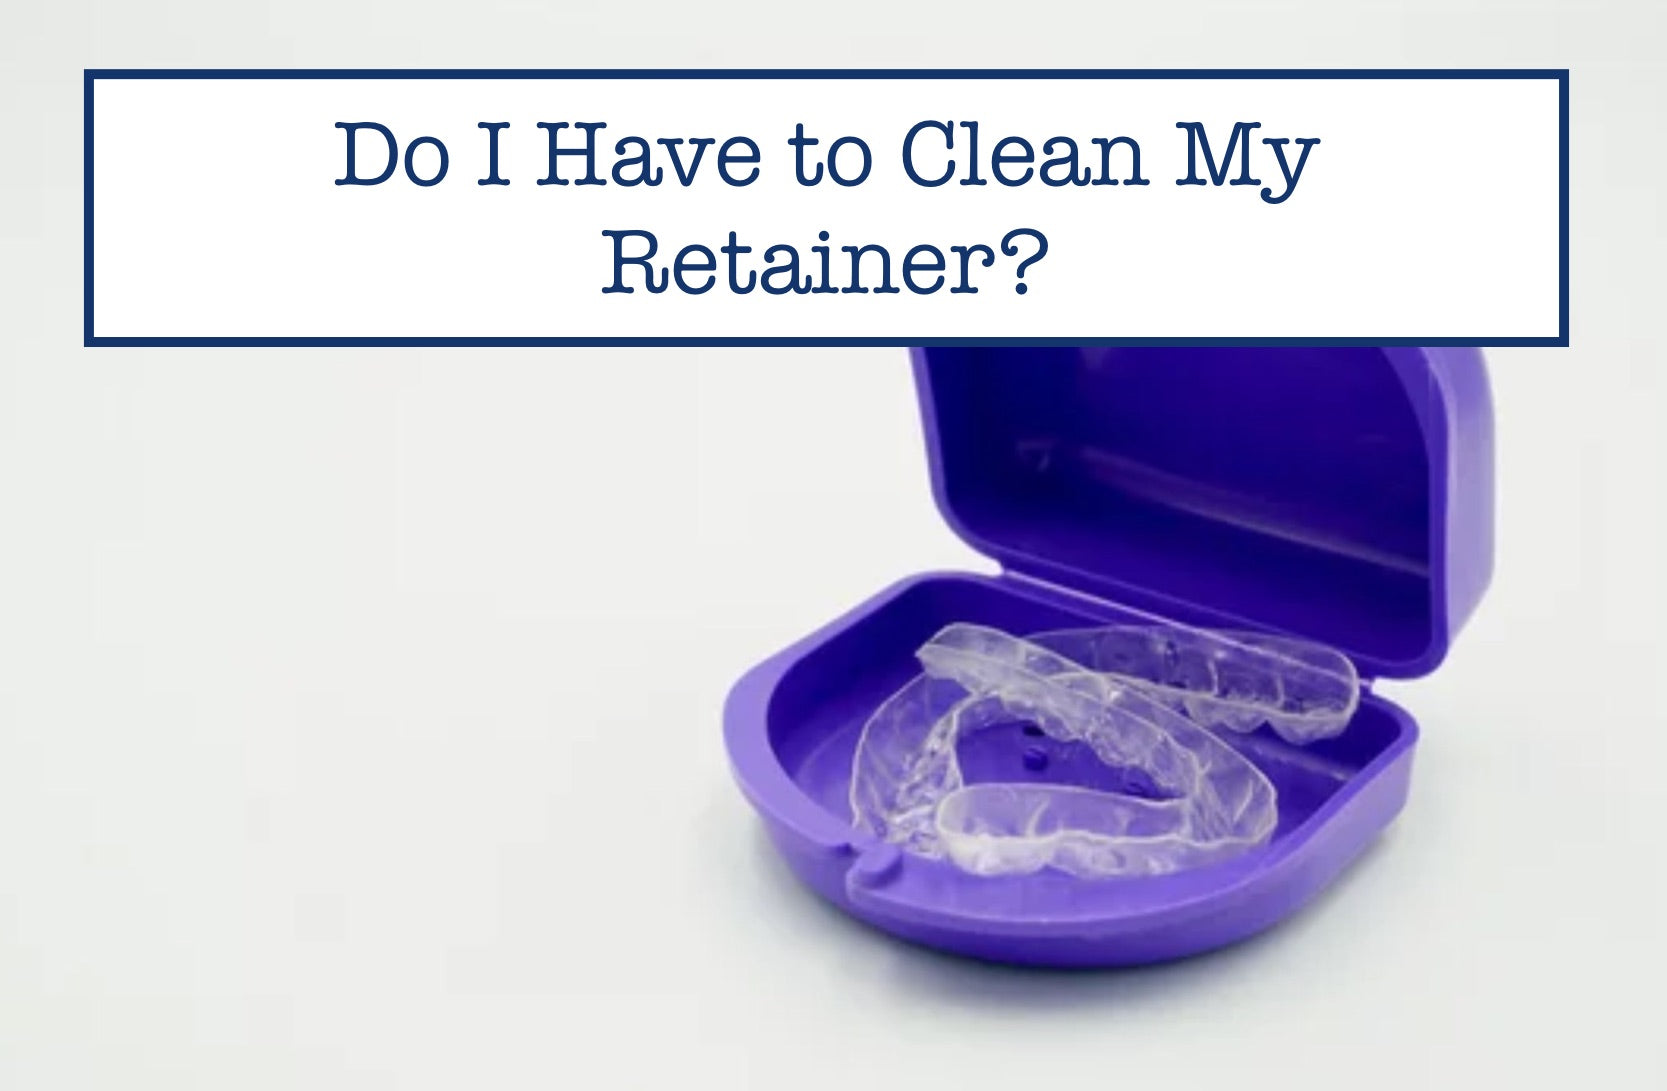 Do I Have to Clean My Retainer?